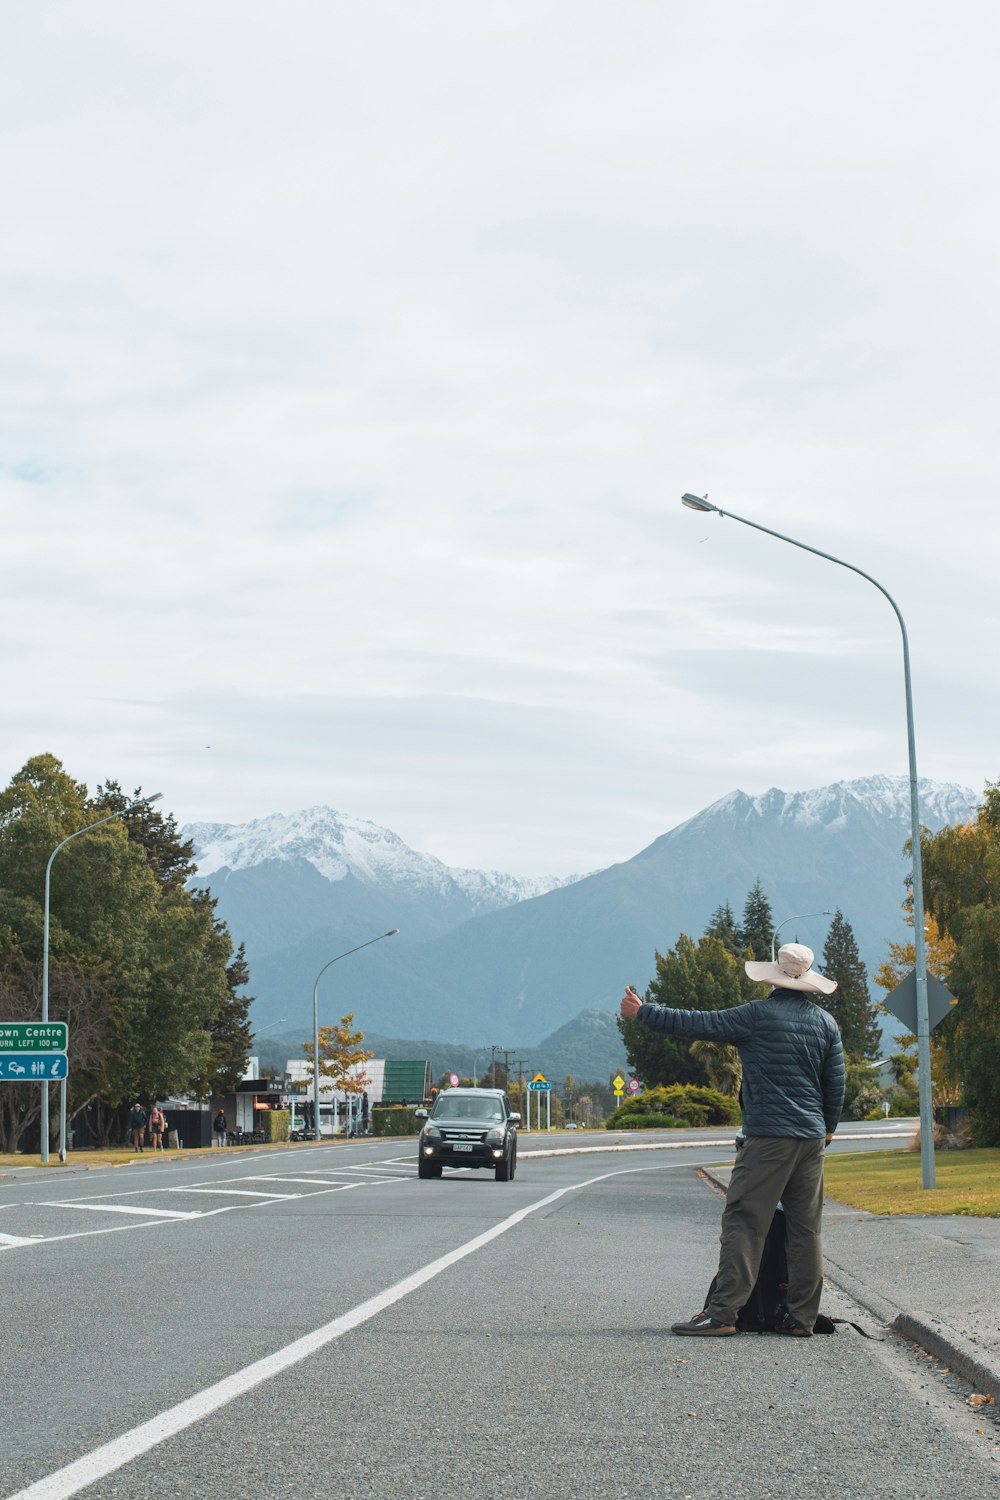 a man standing on the side of a road pointing at something